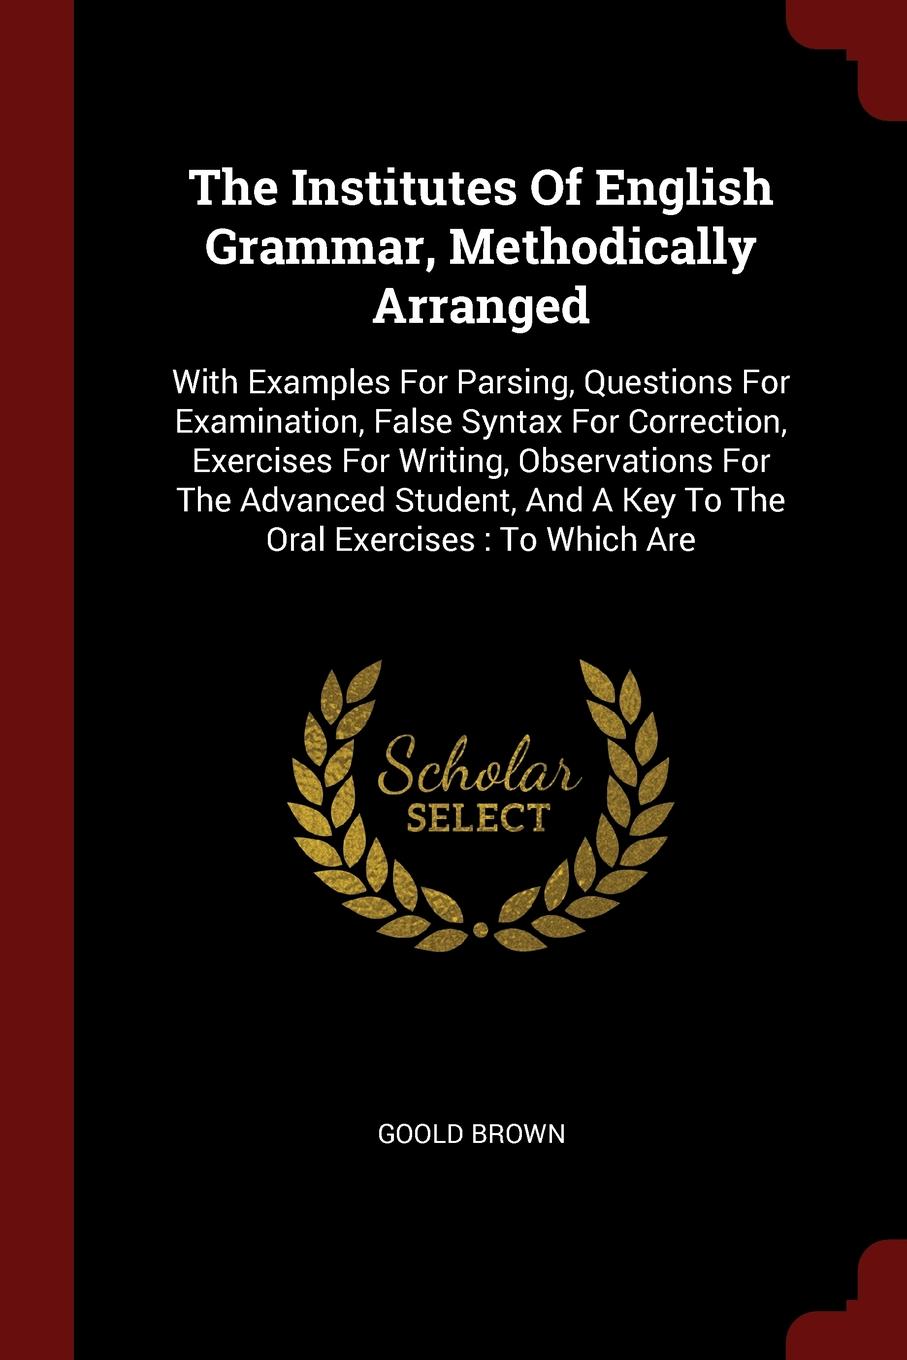 The Institutes Of English Grammar, Methodically Arranged. With Examples For Parsing, Questions For Examination, False Syntax For Correction, Exercises For Writing, Observations For The Advanced Student, And A Key To The Oral Exercises : To Which Are